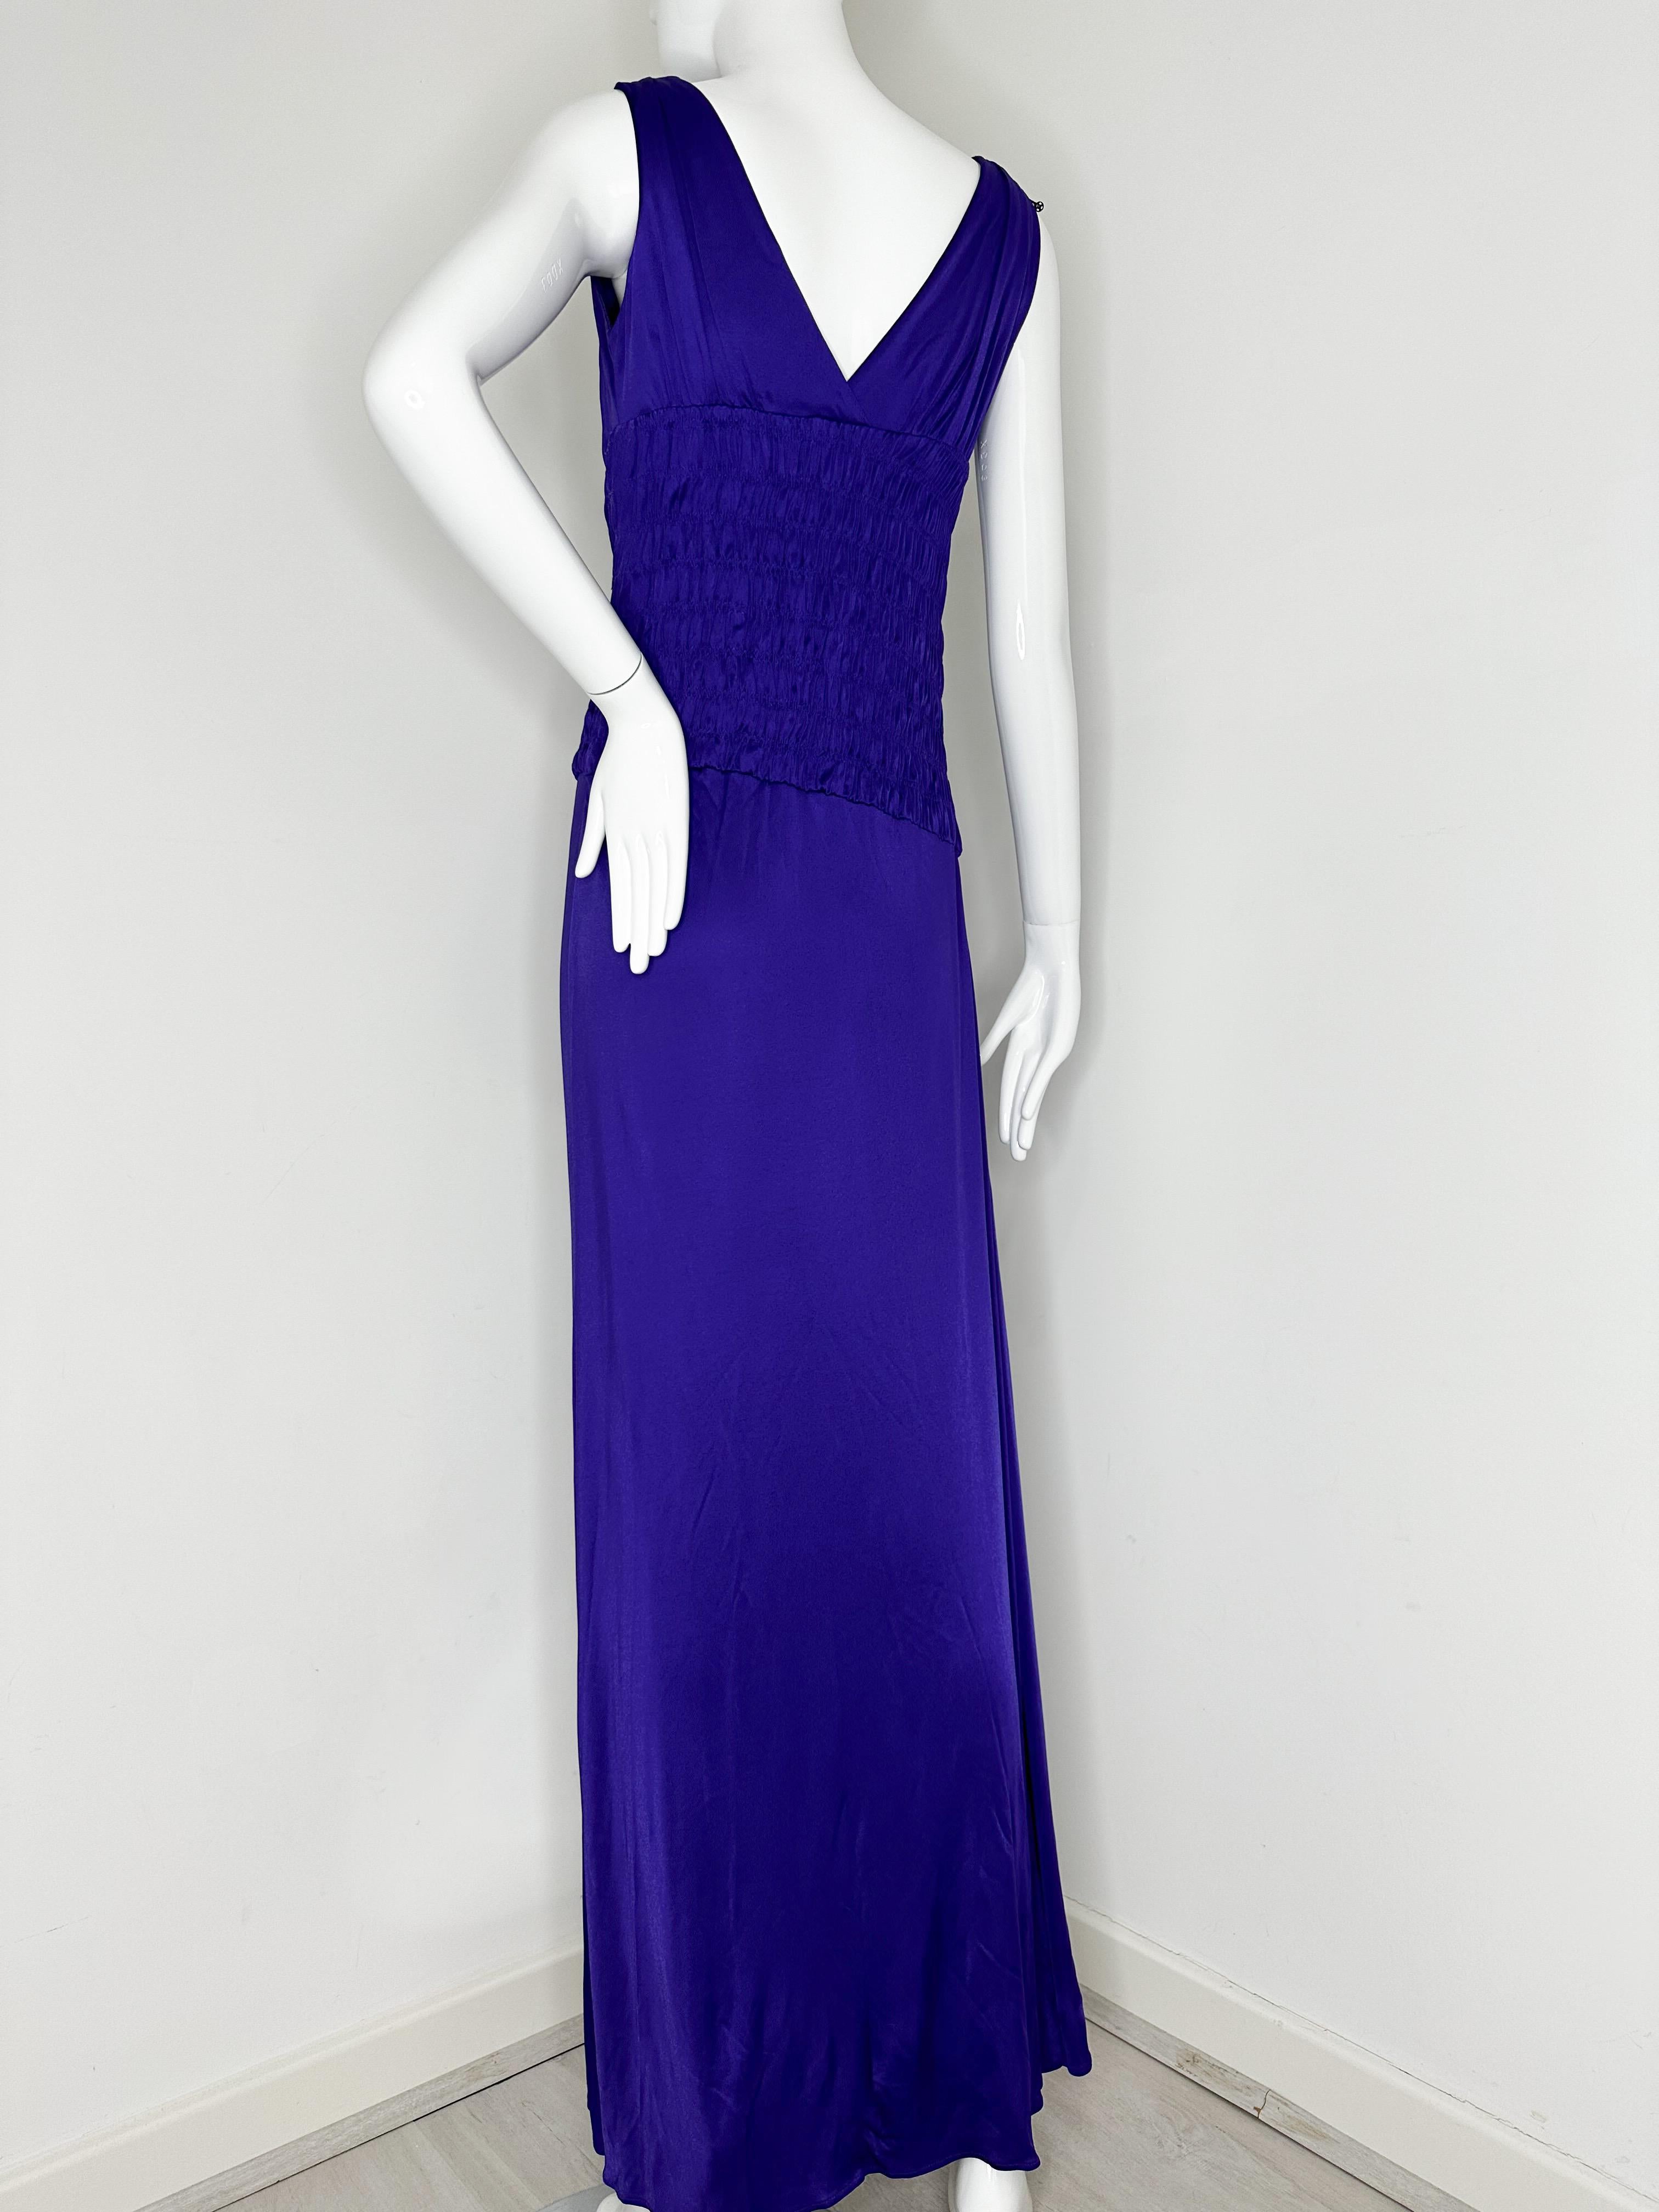 Christian Dior purple gown In Good Condition For Sale In Annandale, VA